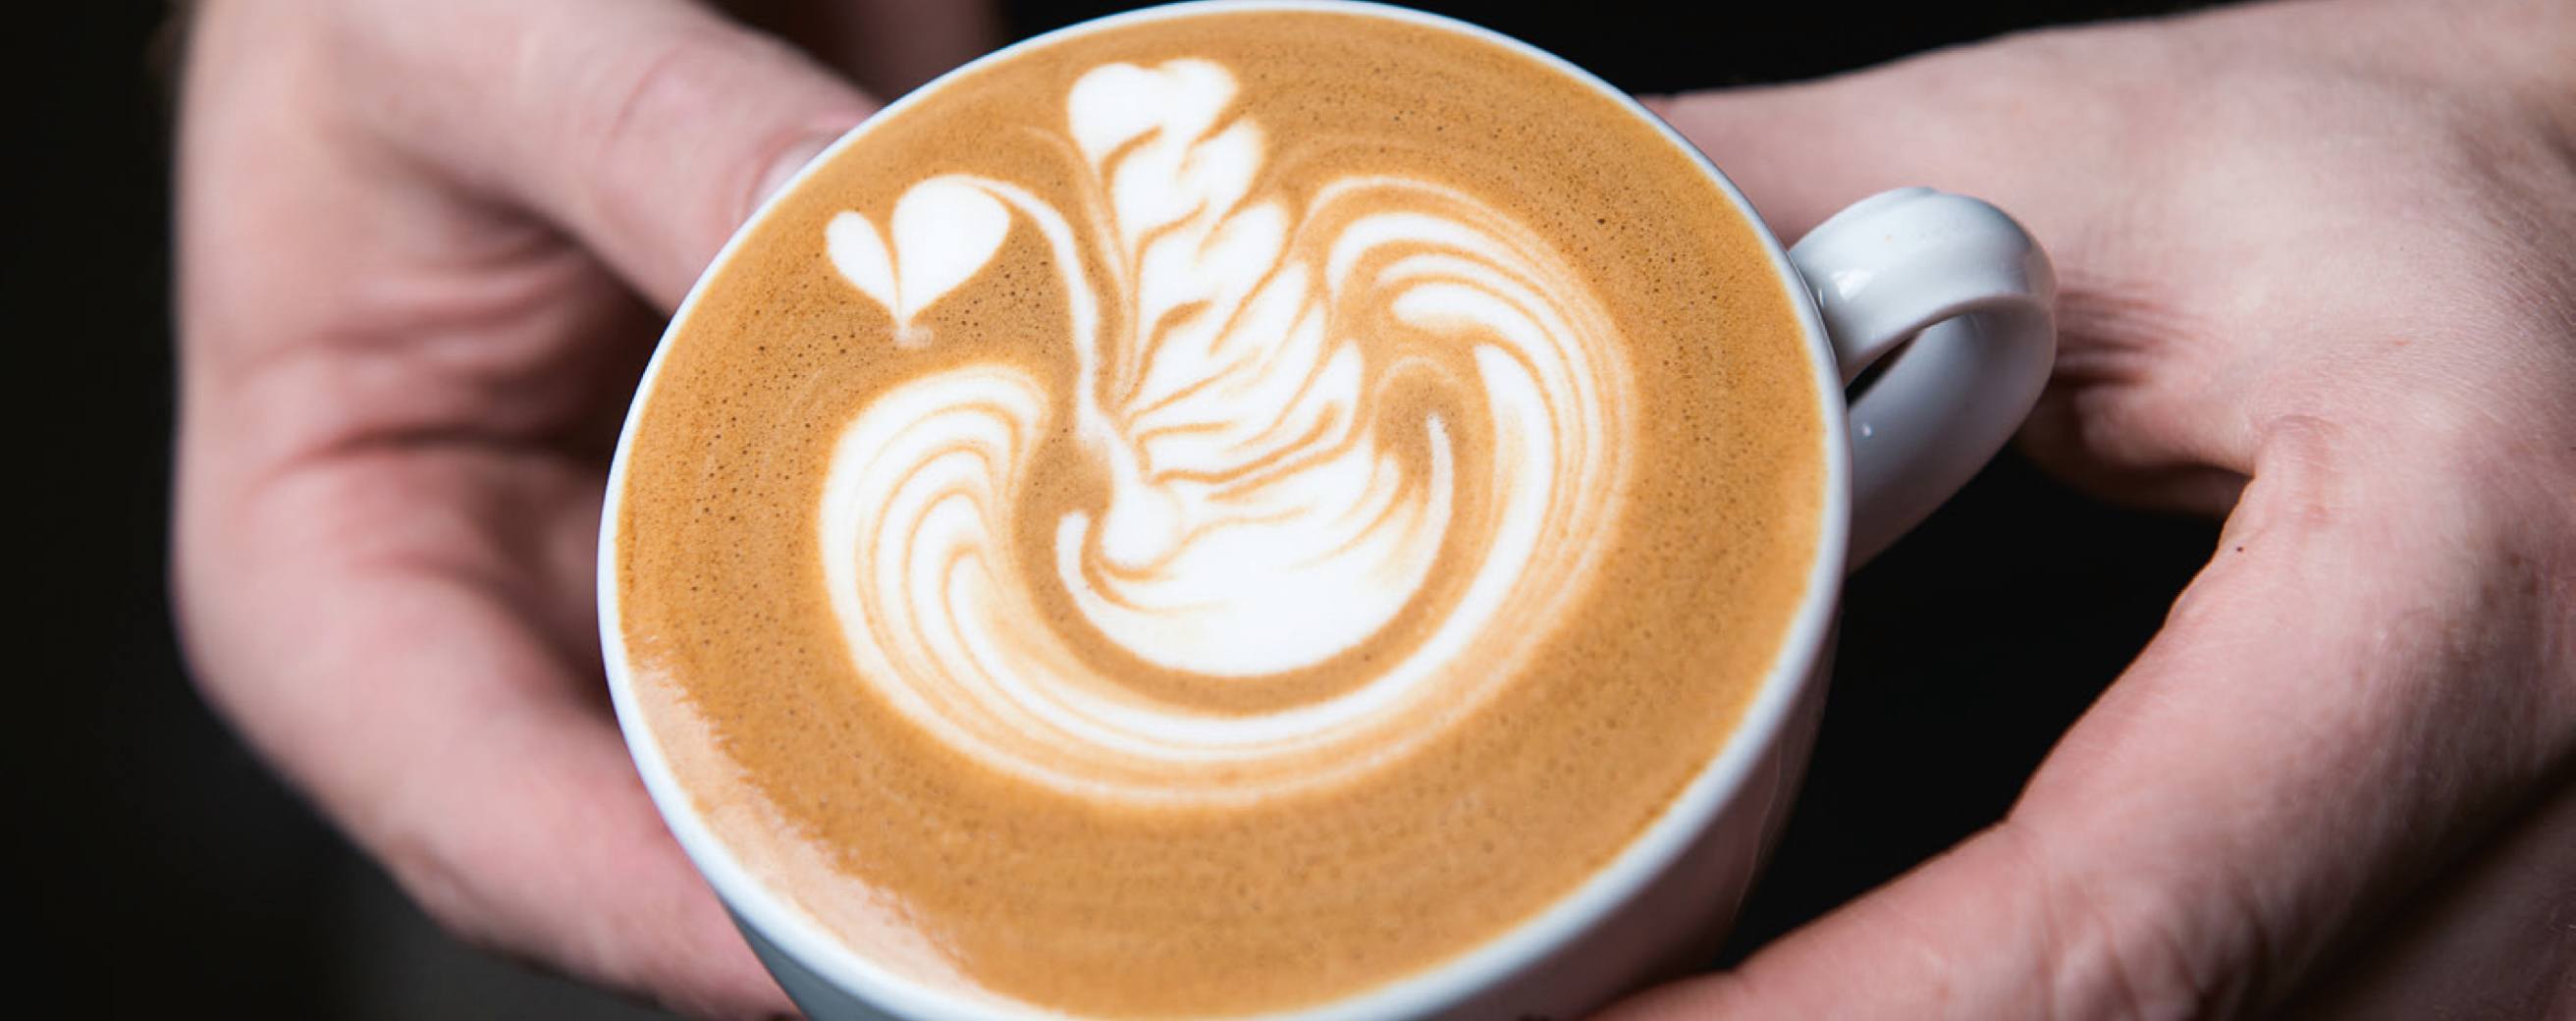 Learn how to make the perfect latte art swan with the smart milk